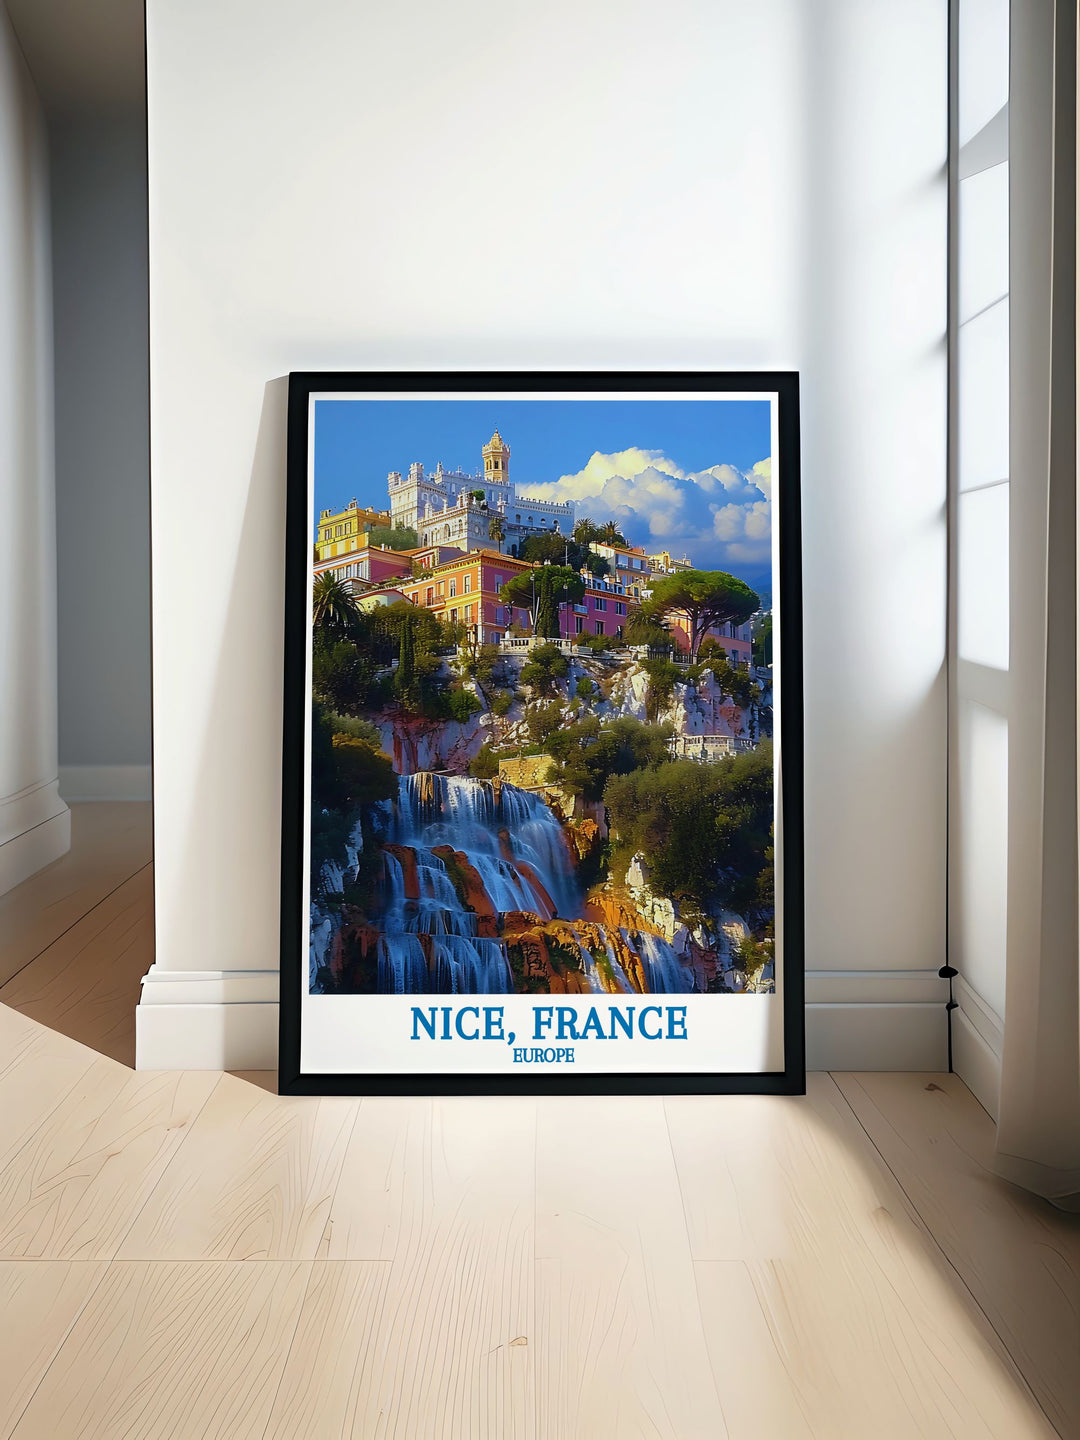 This art print beautifully depicts Colline du Château in Nice, France, highlighting the blend of natural landscapes and ancient architecture, ideal for those who appreciate both history and scenic beauty.